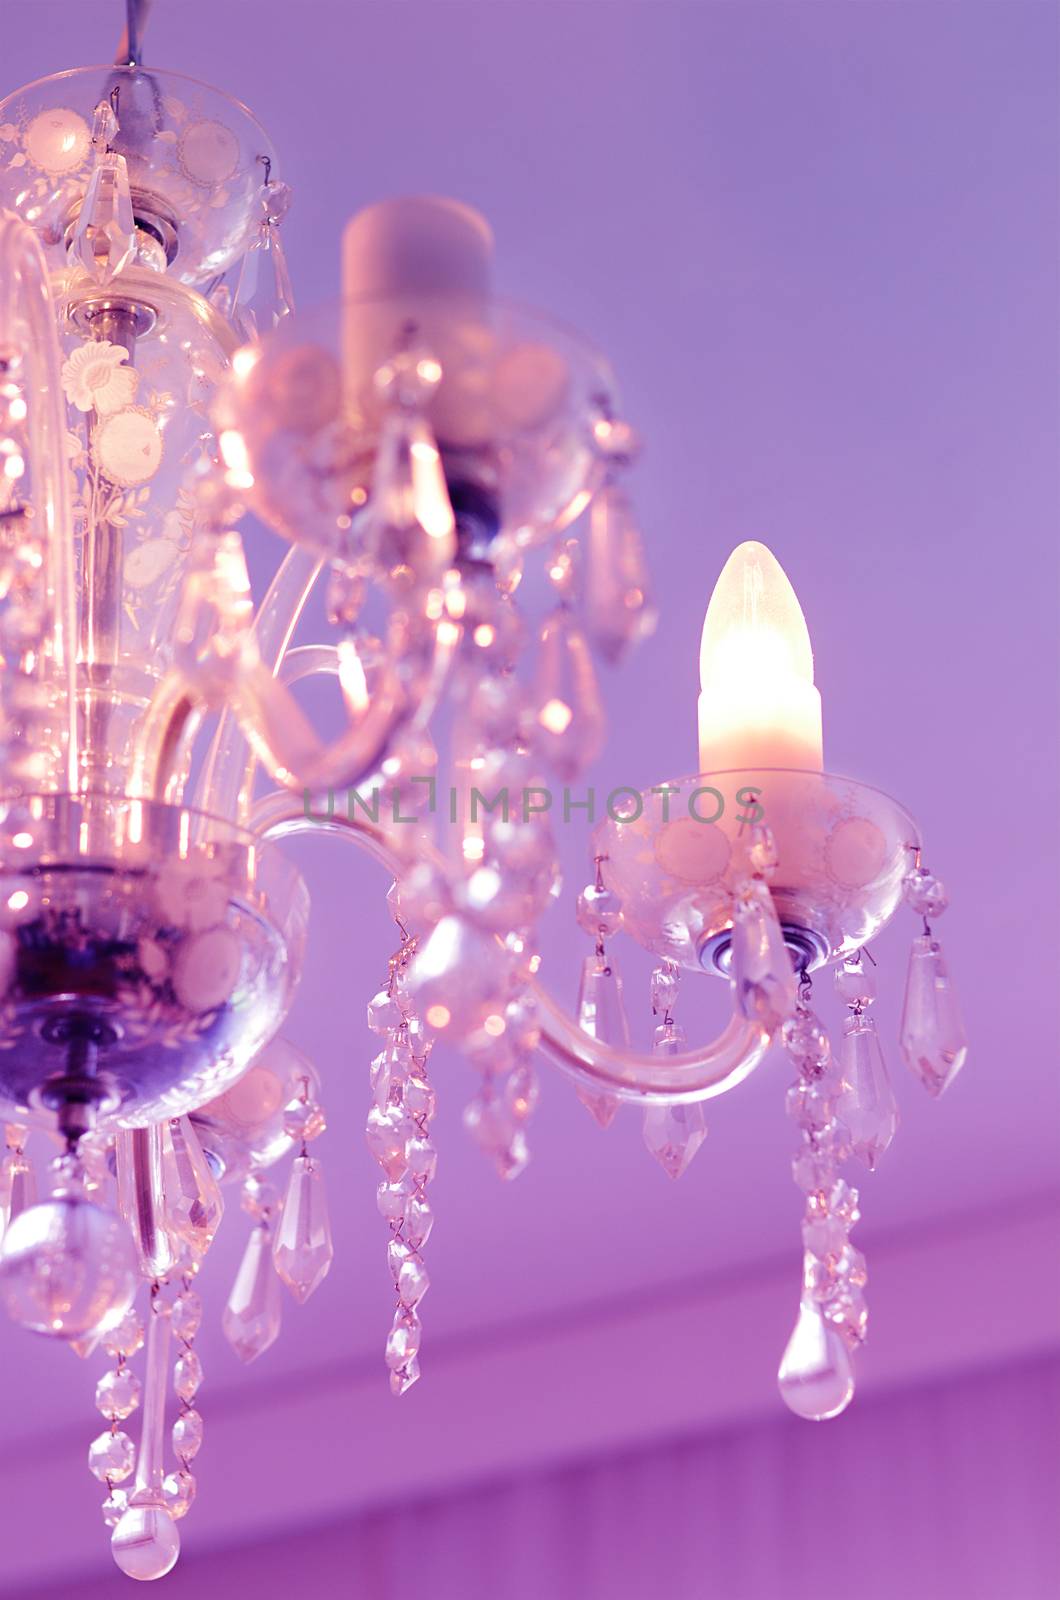 chandelier by sarkao